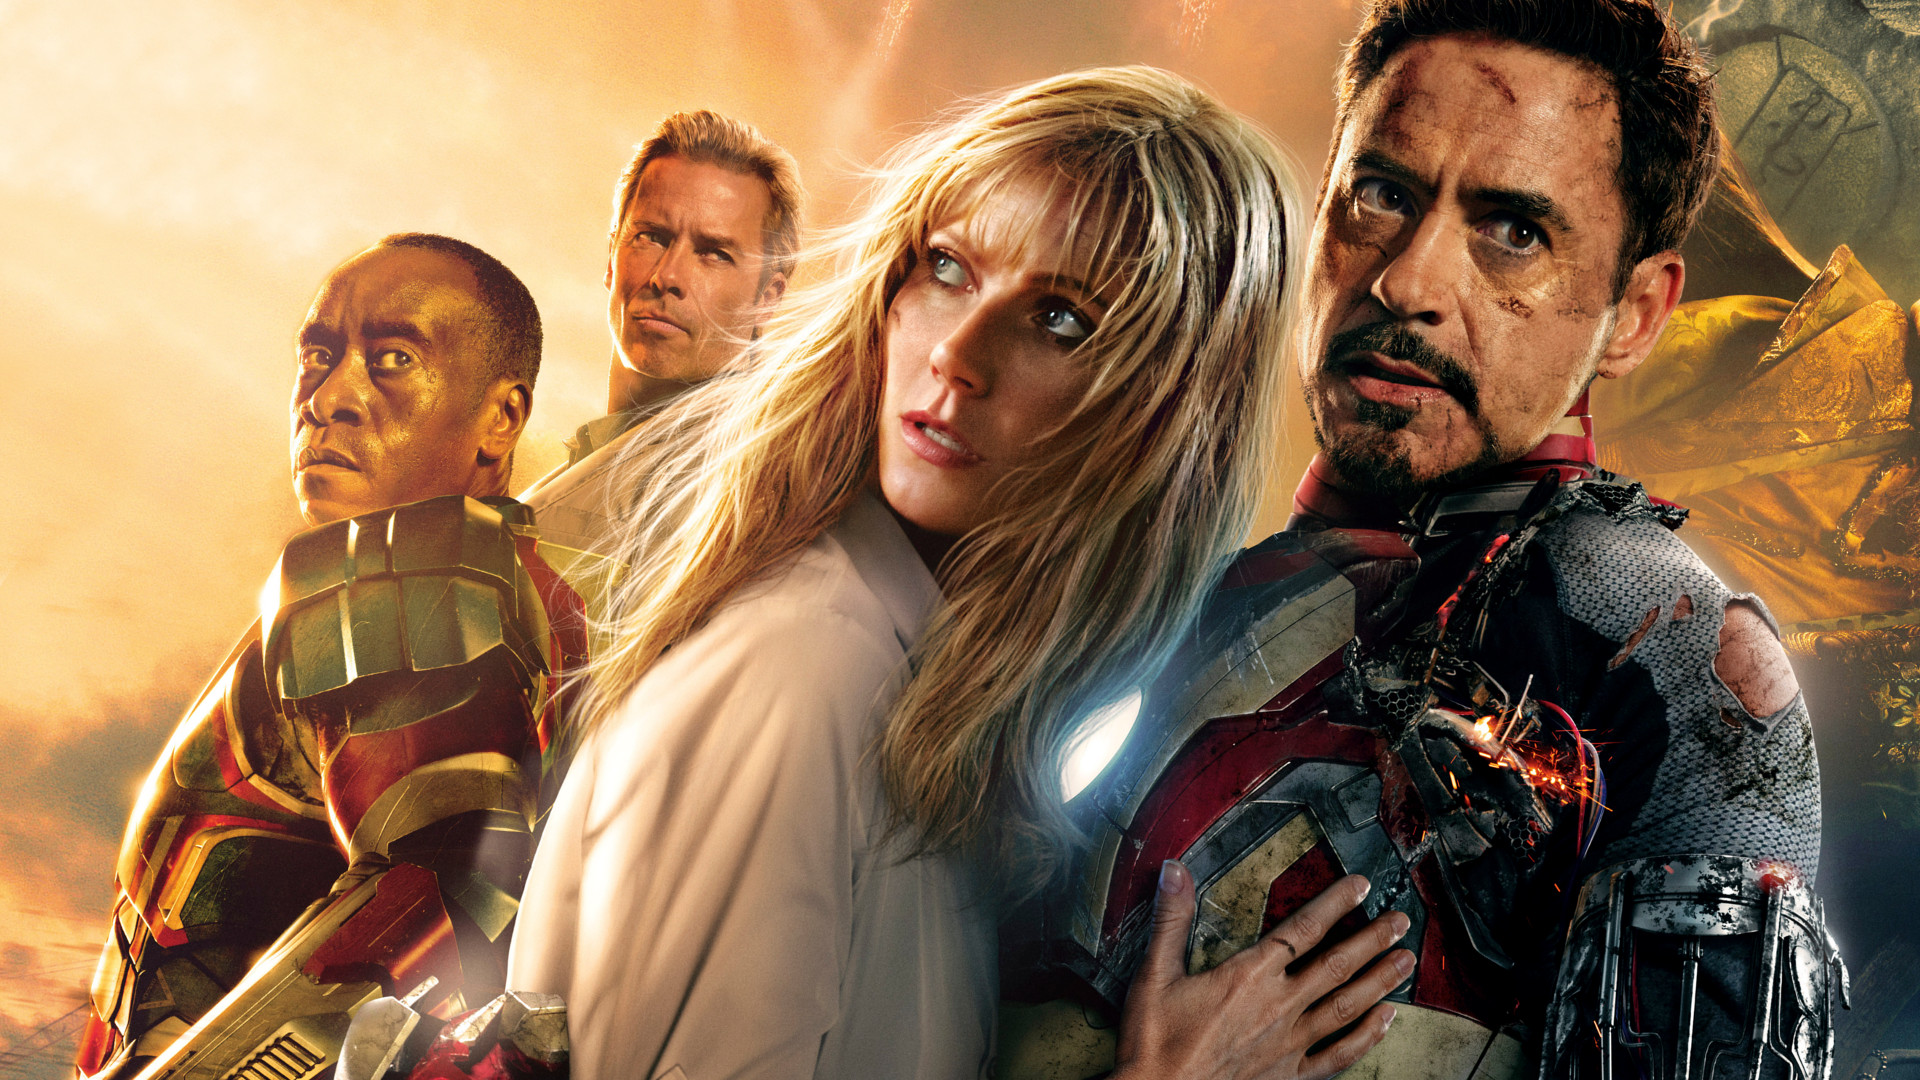 Iron Man 3 download the last version for windows